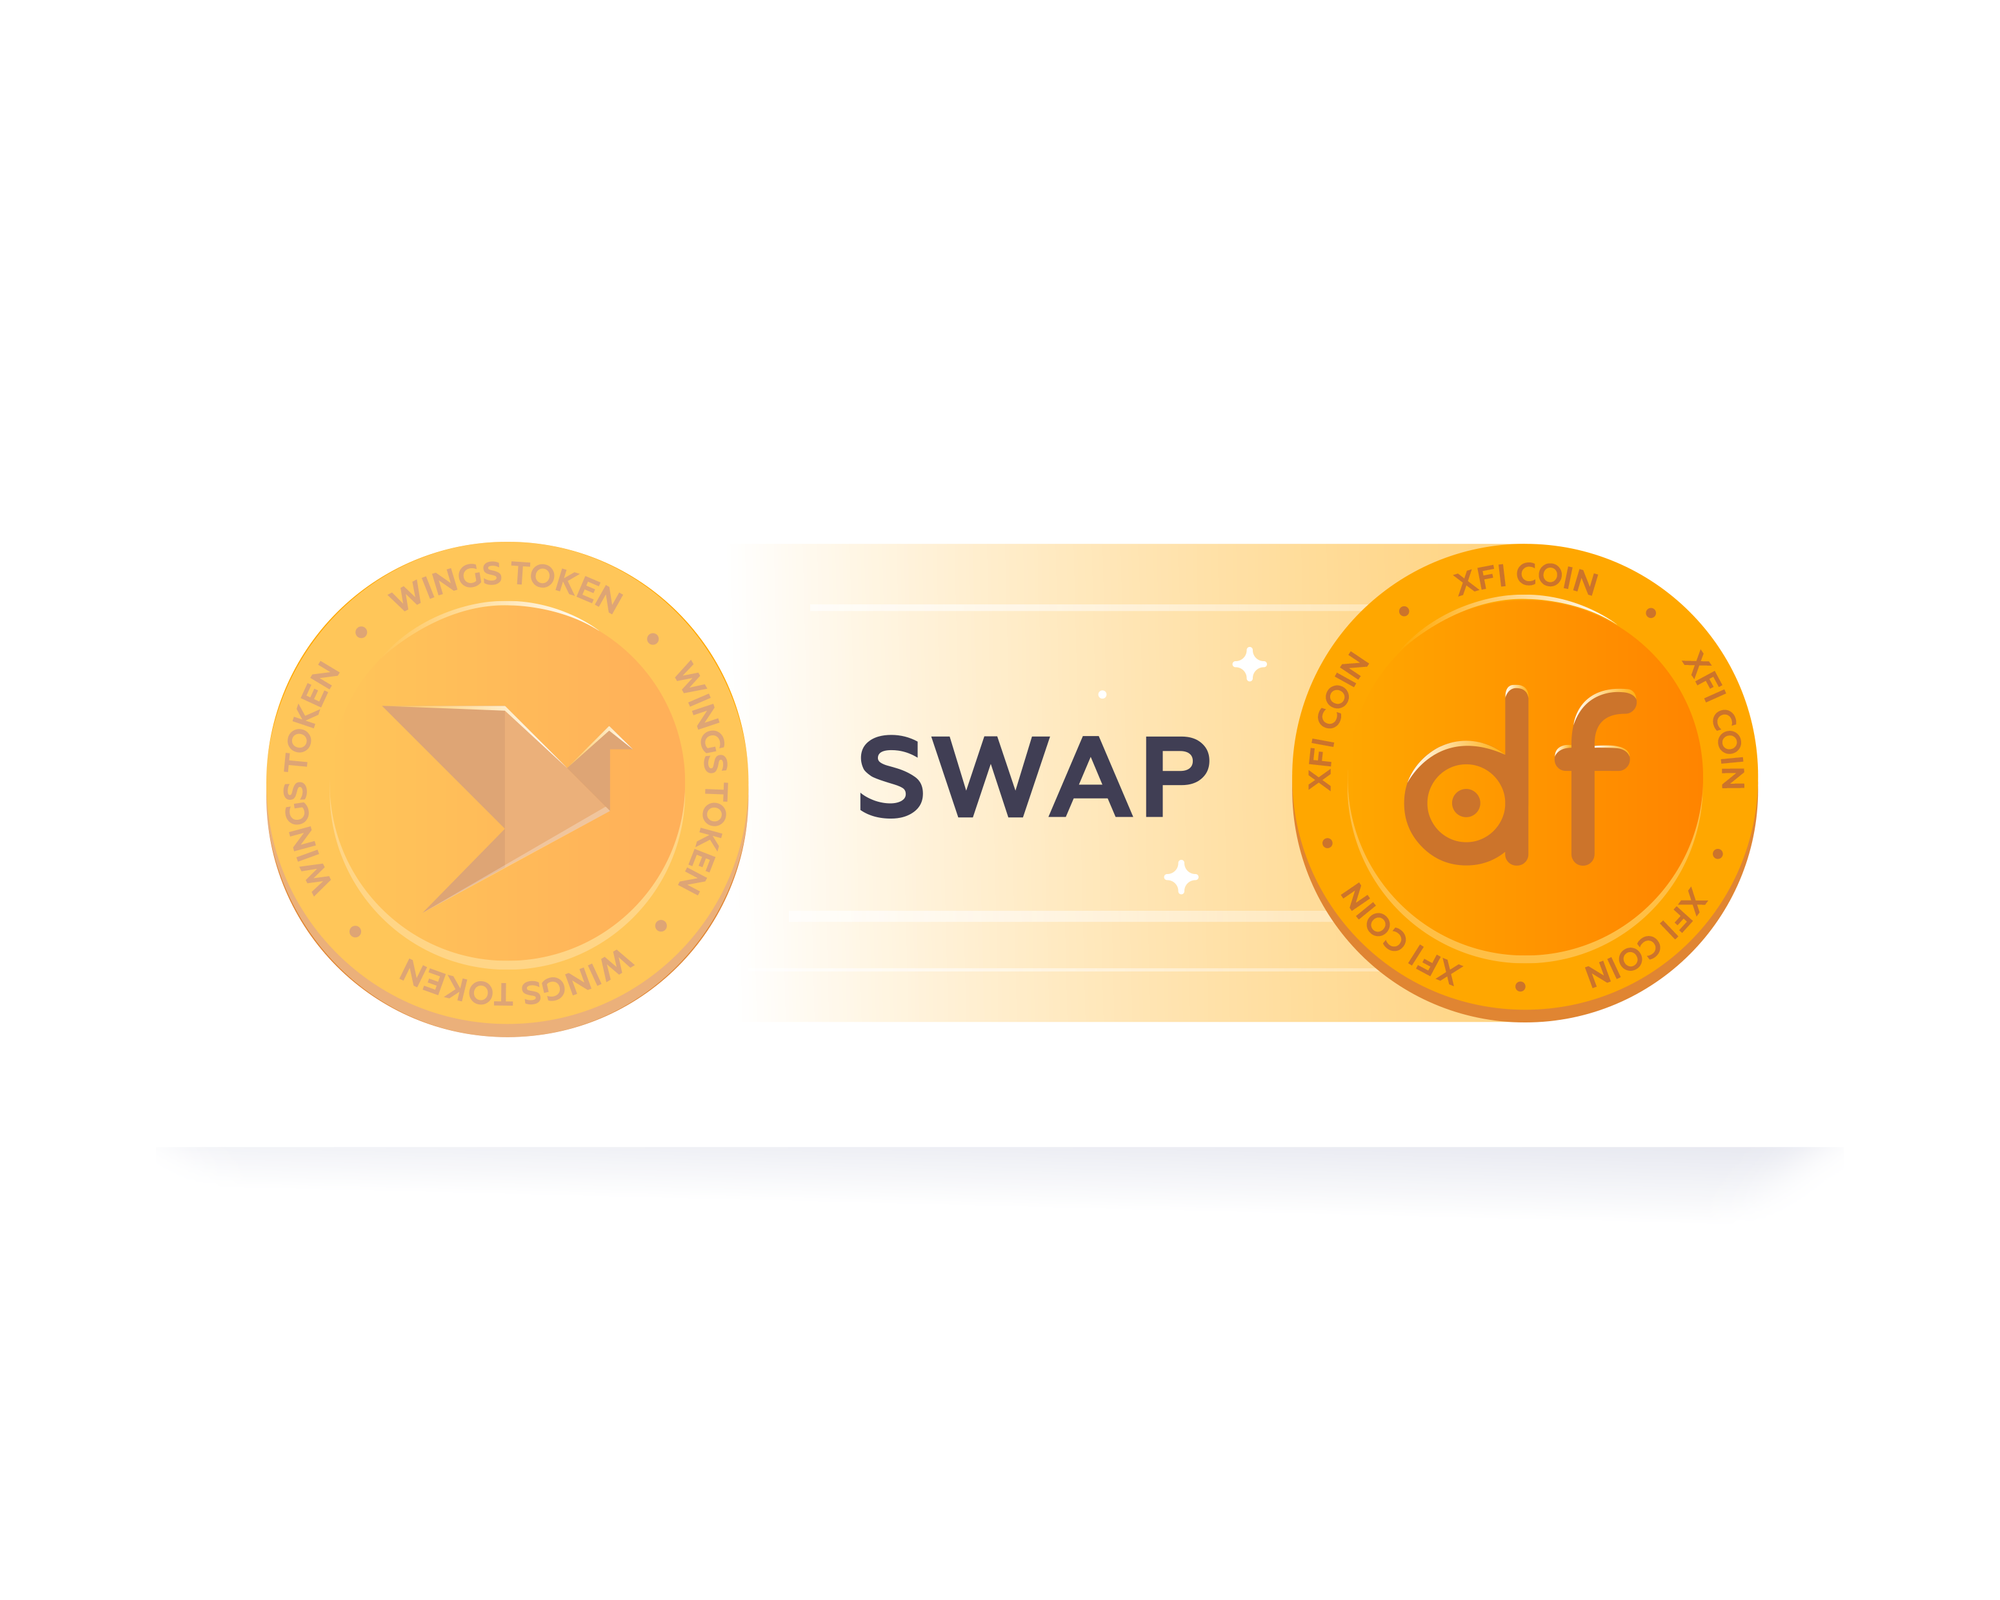 It's here! The WINGS to XFI swap